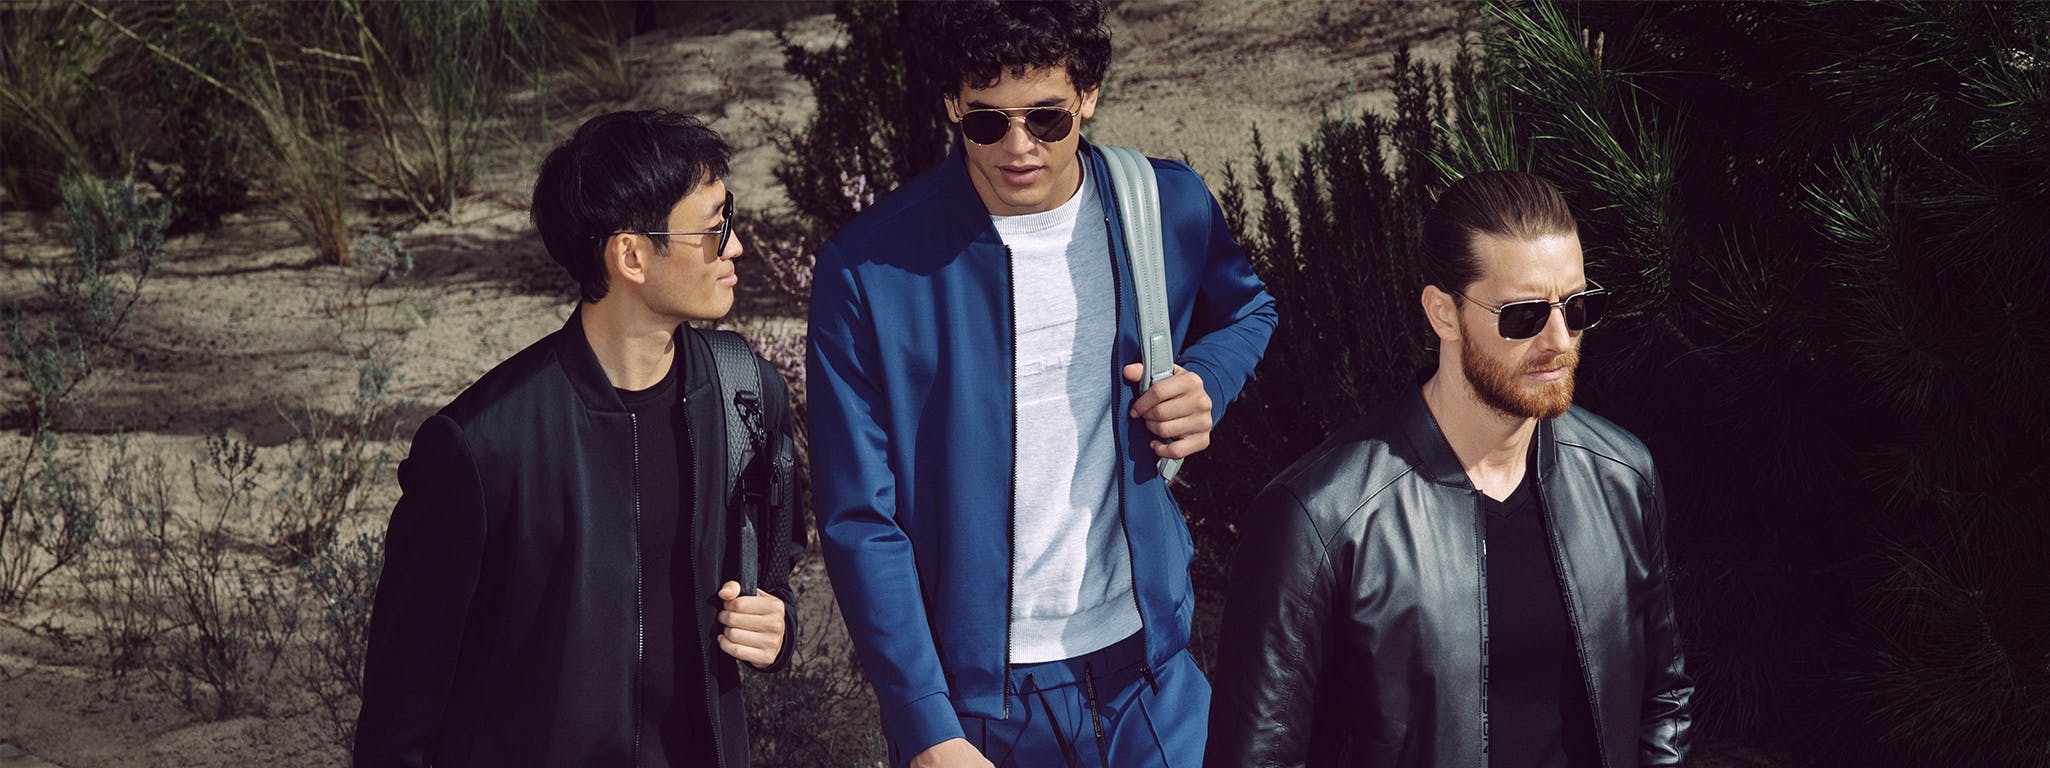 three men modelling outfits and sunglasses